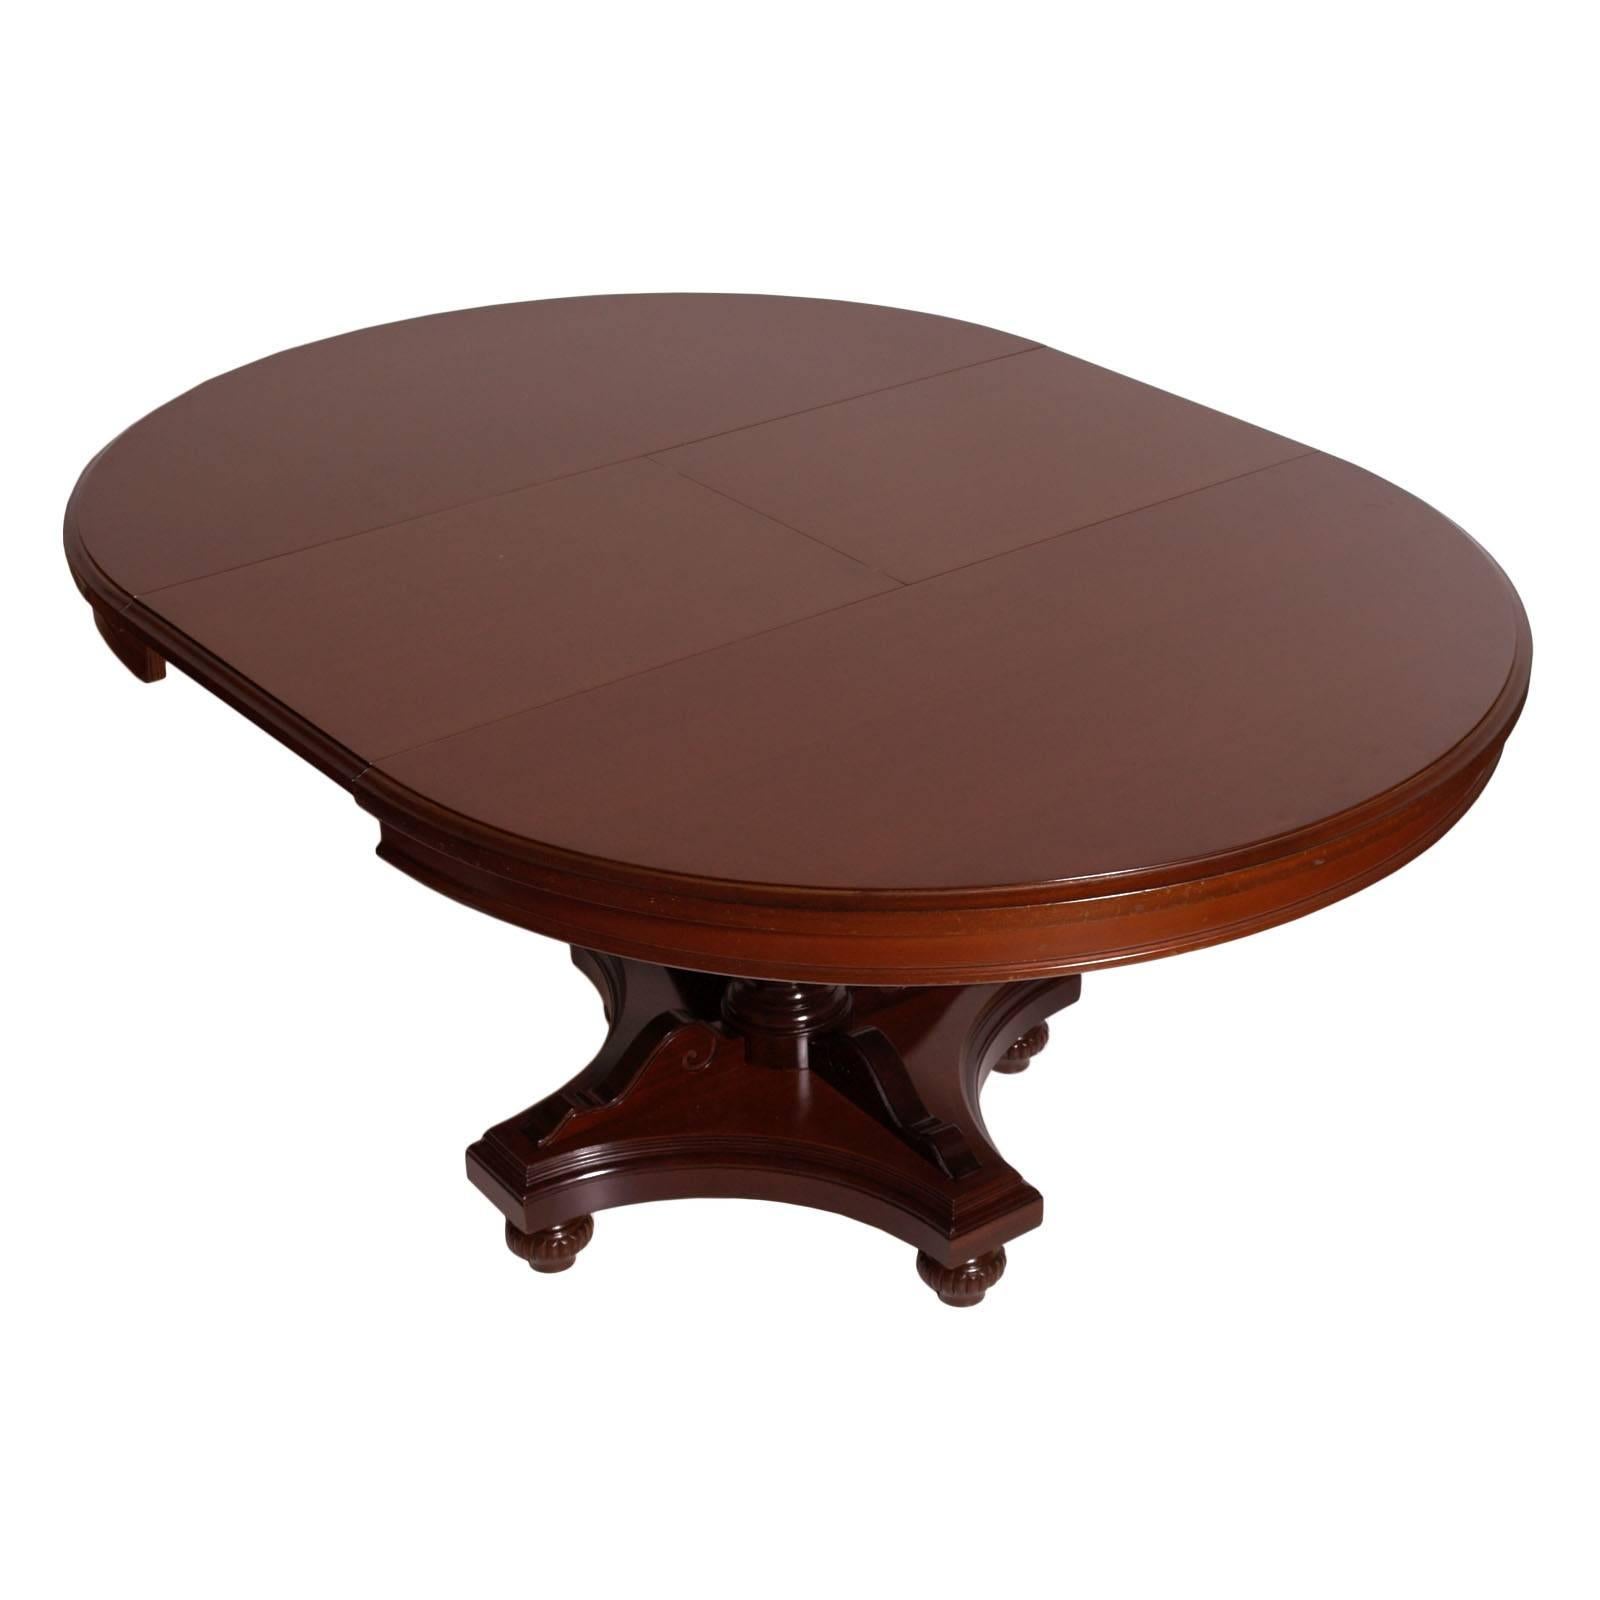 Era Art Deco elegant Italian extendable round table, Regency style, in solid mahogany, polished to wax. Excellent patina e conditions.

Measures cm: H 80, W 120, add 45 D 120.